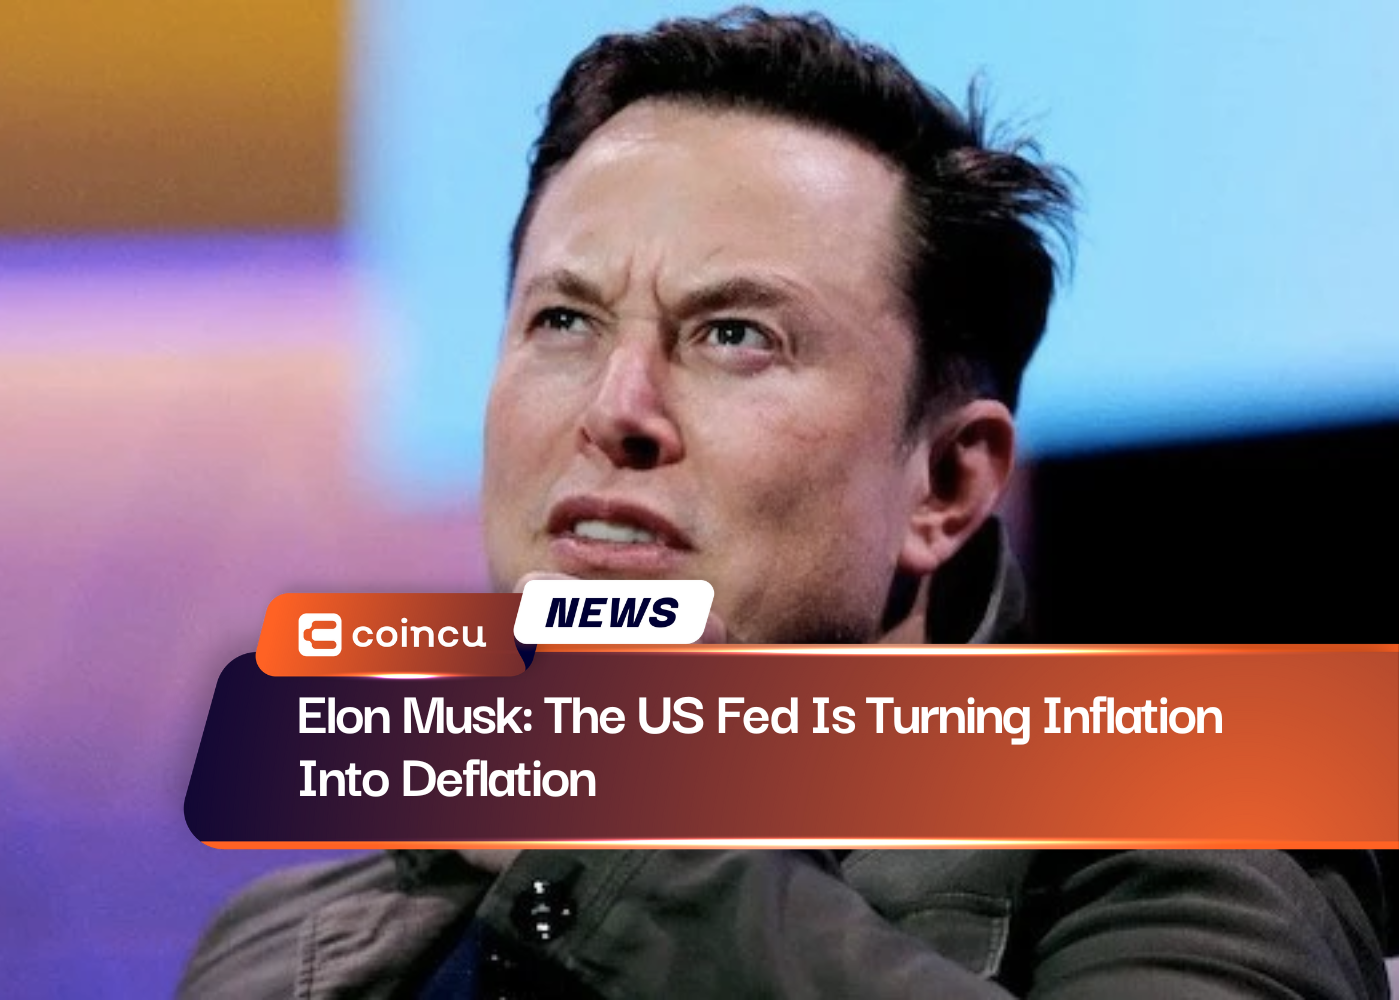 Elon Musk: The US Fed Is Turning Inflation Into Deflation